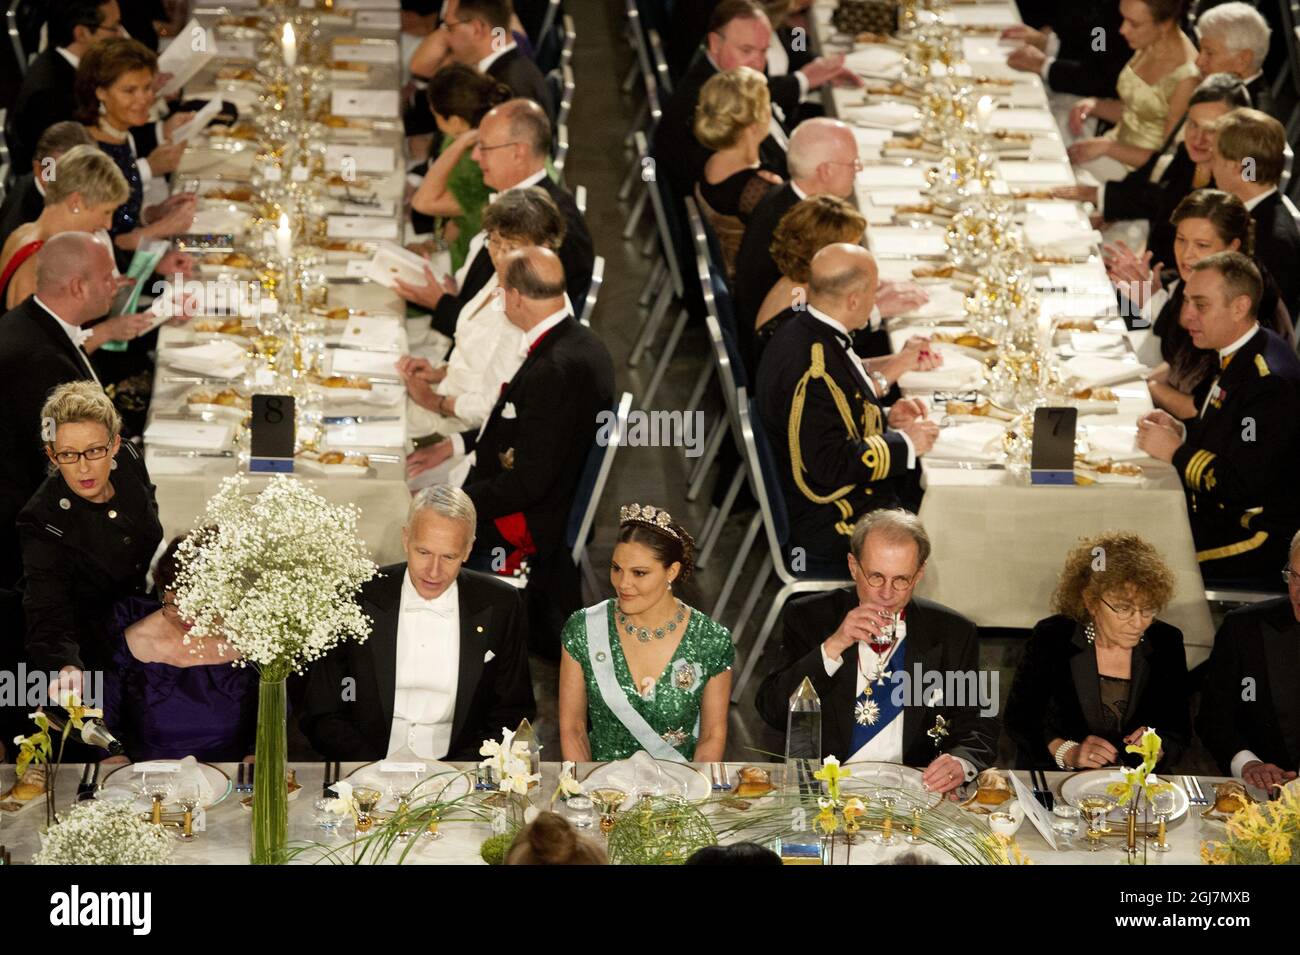 STOCKHOLM 2012-12-10 The guests at the honorary table, Brian K. Kobilka, Nobel Laureate in Chemistry,  Crown Princess  Victoria, Per Westerberg, Speaker of the House of Parliament, Claudine Haroche at the Nobel Banquet in the City Hall in Stockholm Sweden, December 10, 2012. Photo Jessica Gow  / SCANPIX code 10070   Stock Photo